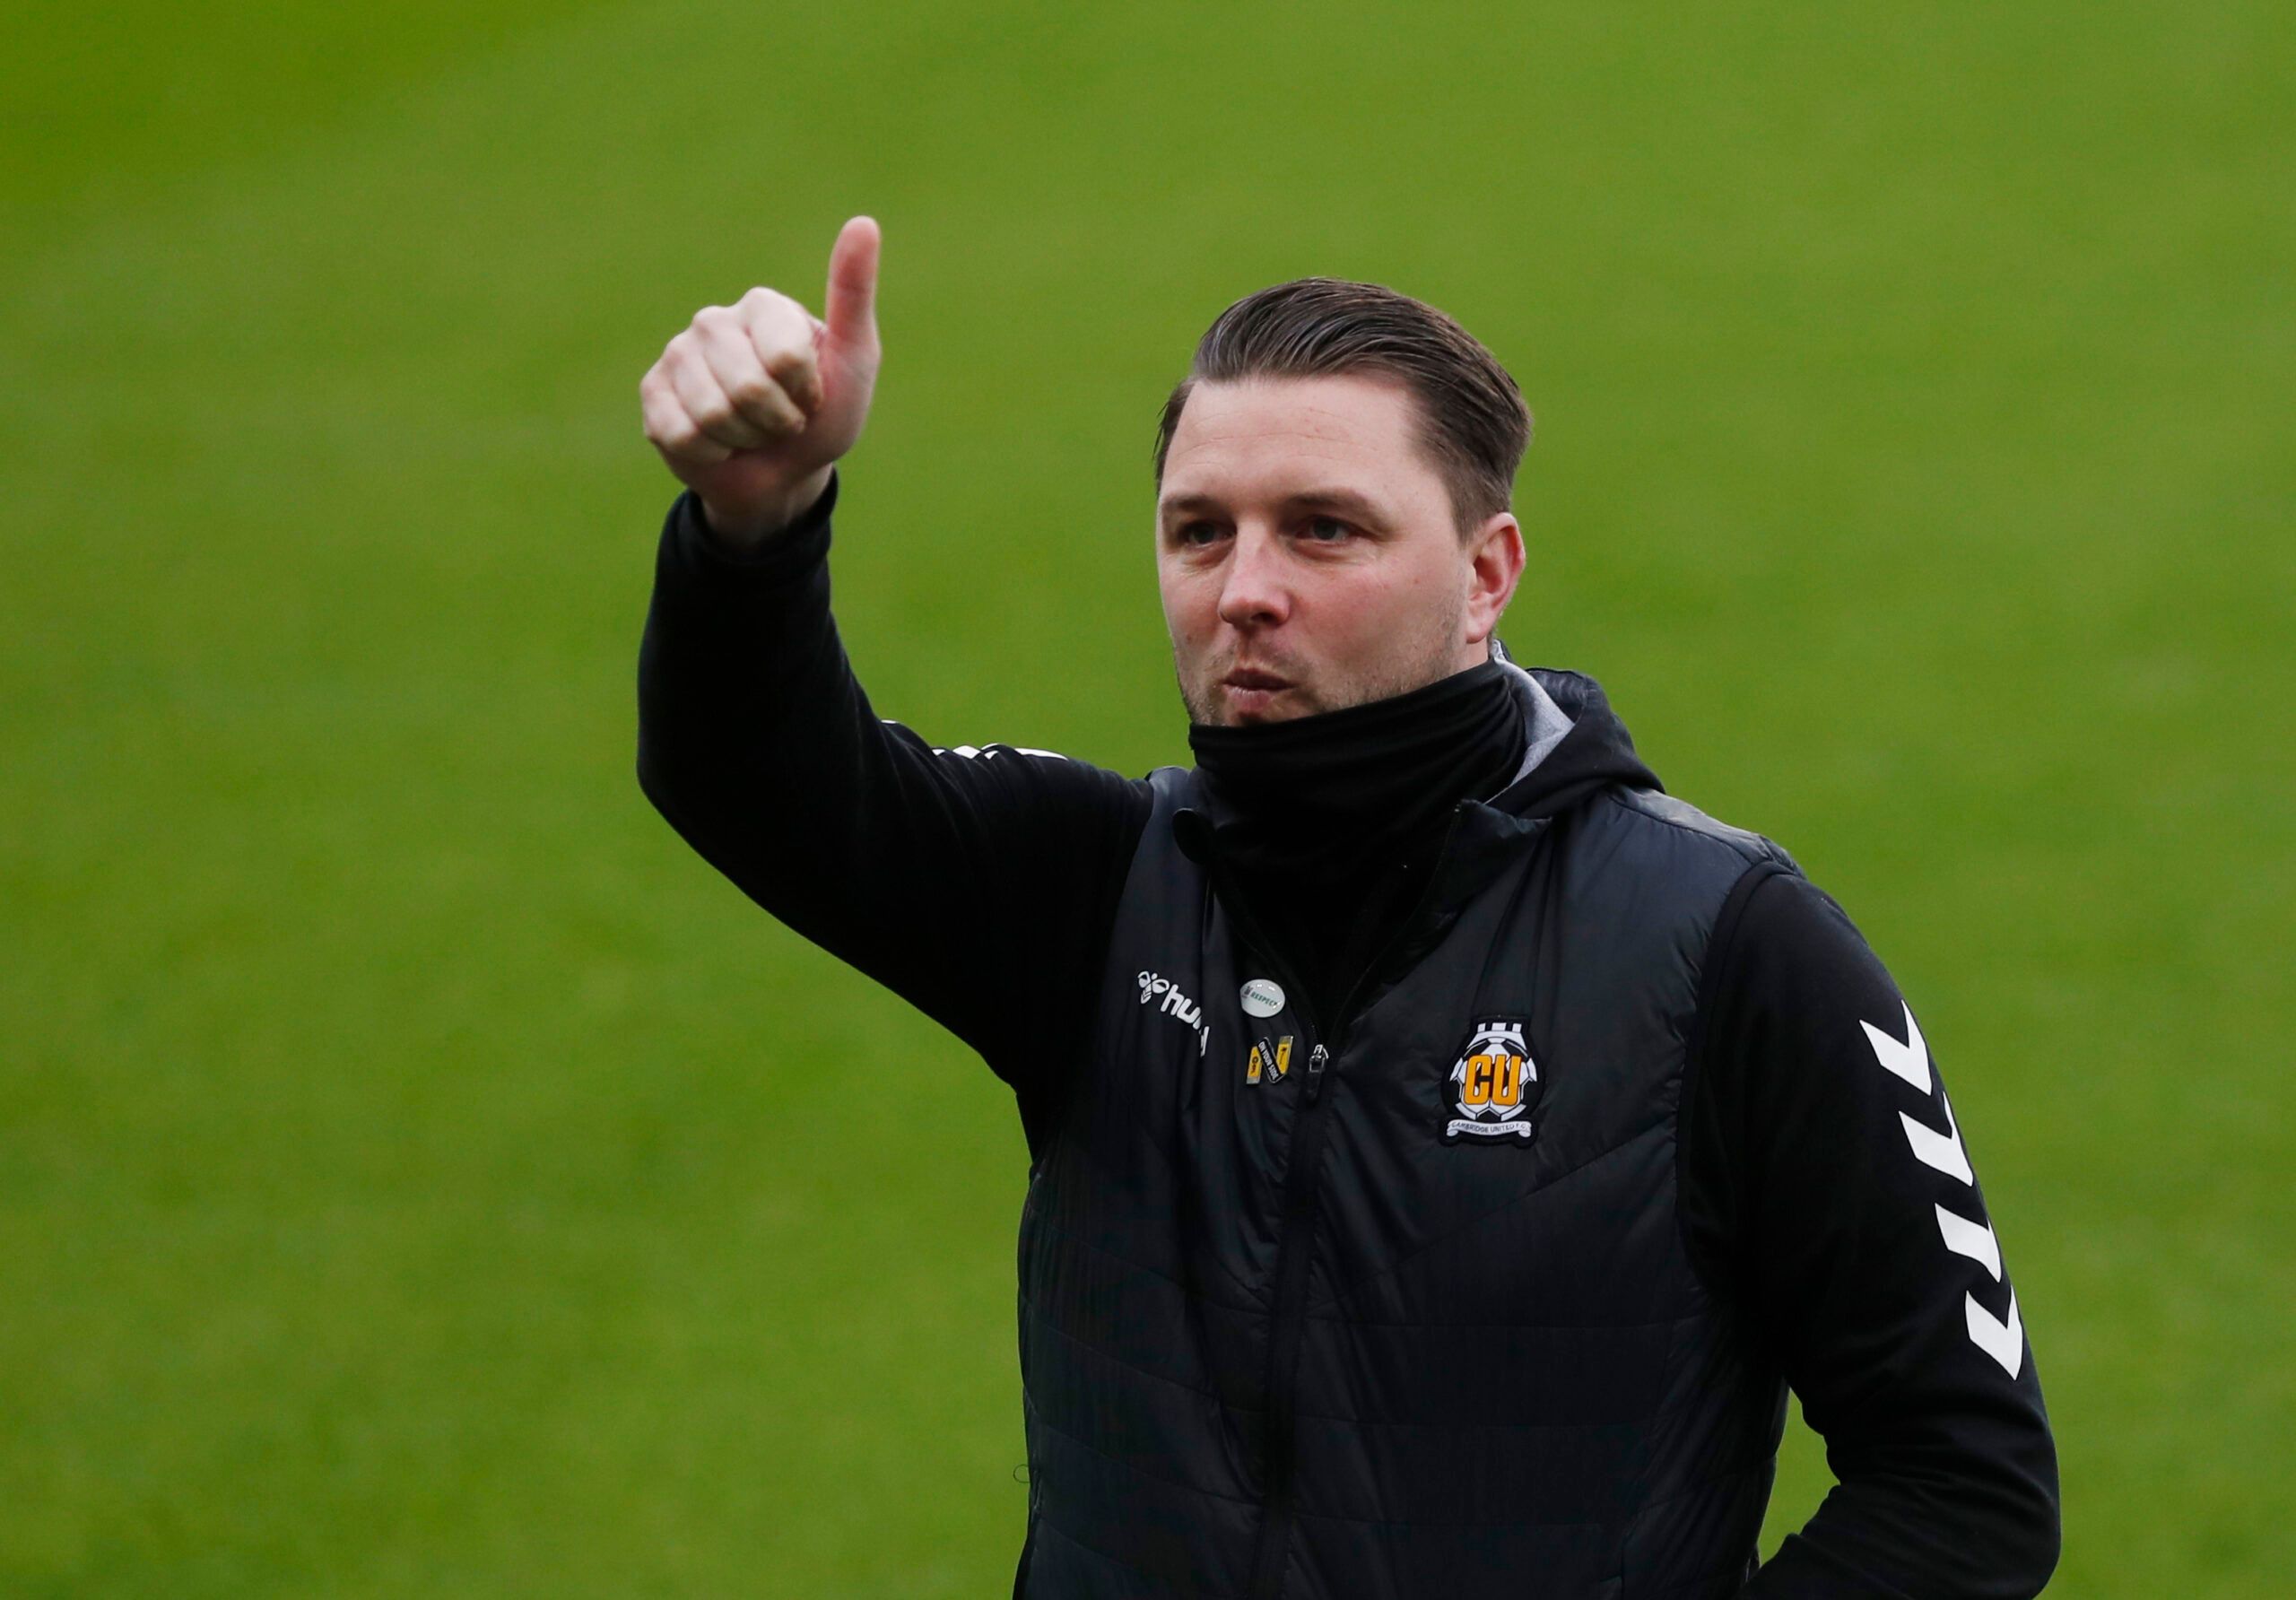 Soccer Football - FA Cup Third Round - Newcastle United v Cambridge United - St James' Park, Newcastle, Britain - January 8, 2022  Cambridge United coach Mark Bonner on the pitch before the match Action Images via Reuters/Lee Smith